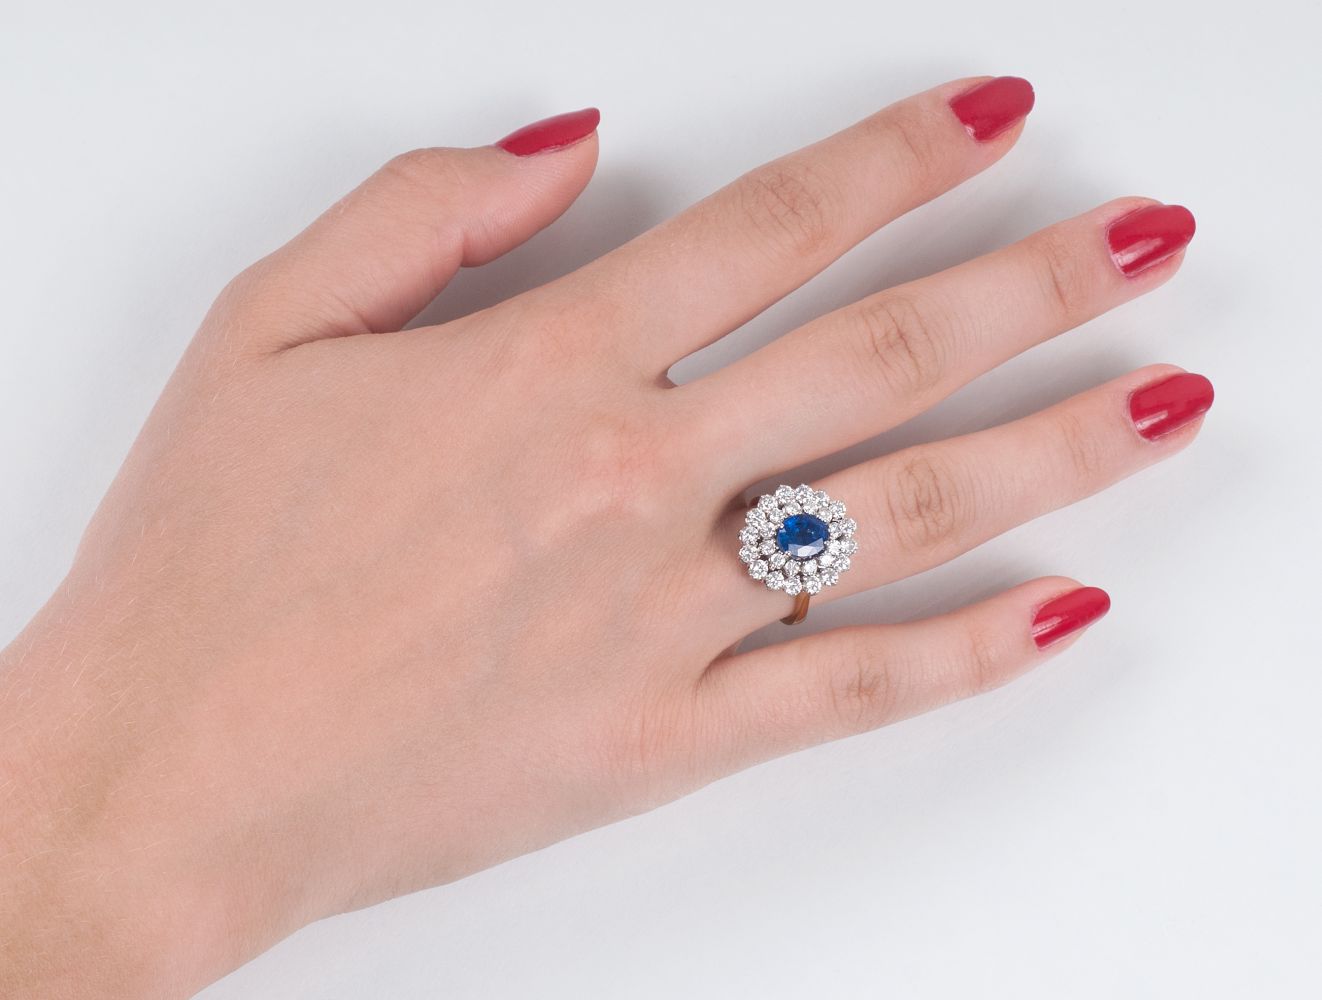 A very fine Diamond Ring with natural Sapphire - image 3